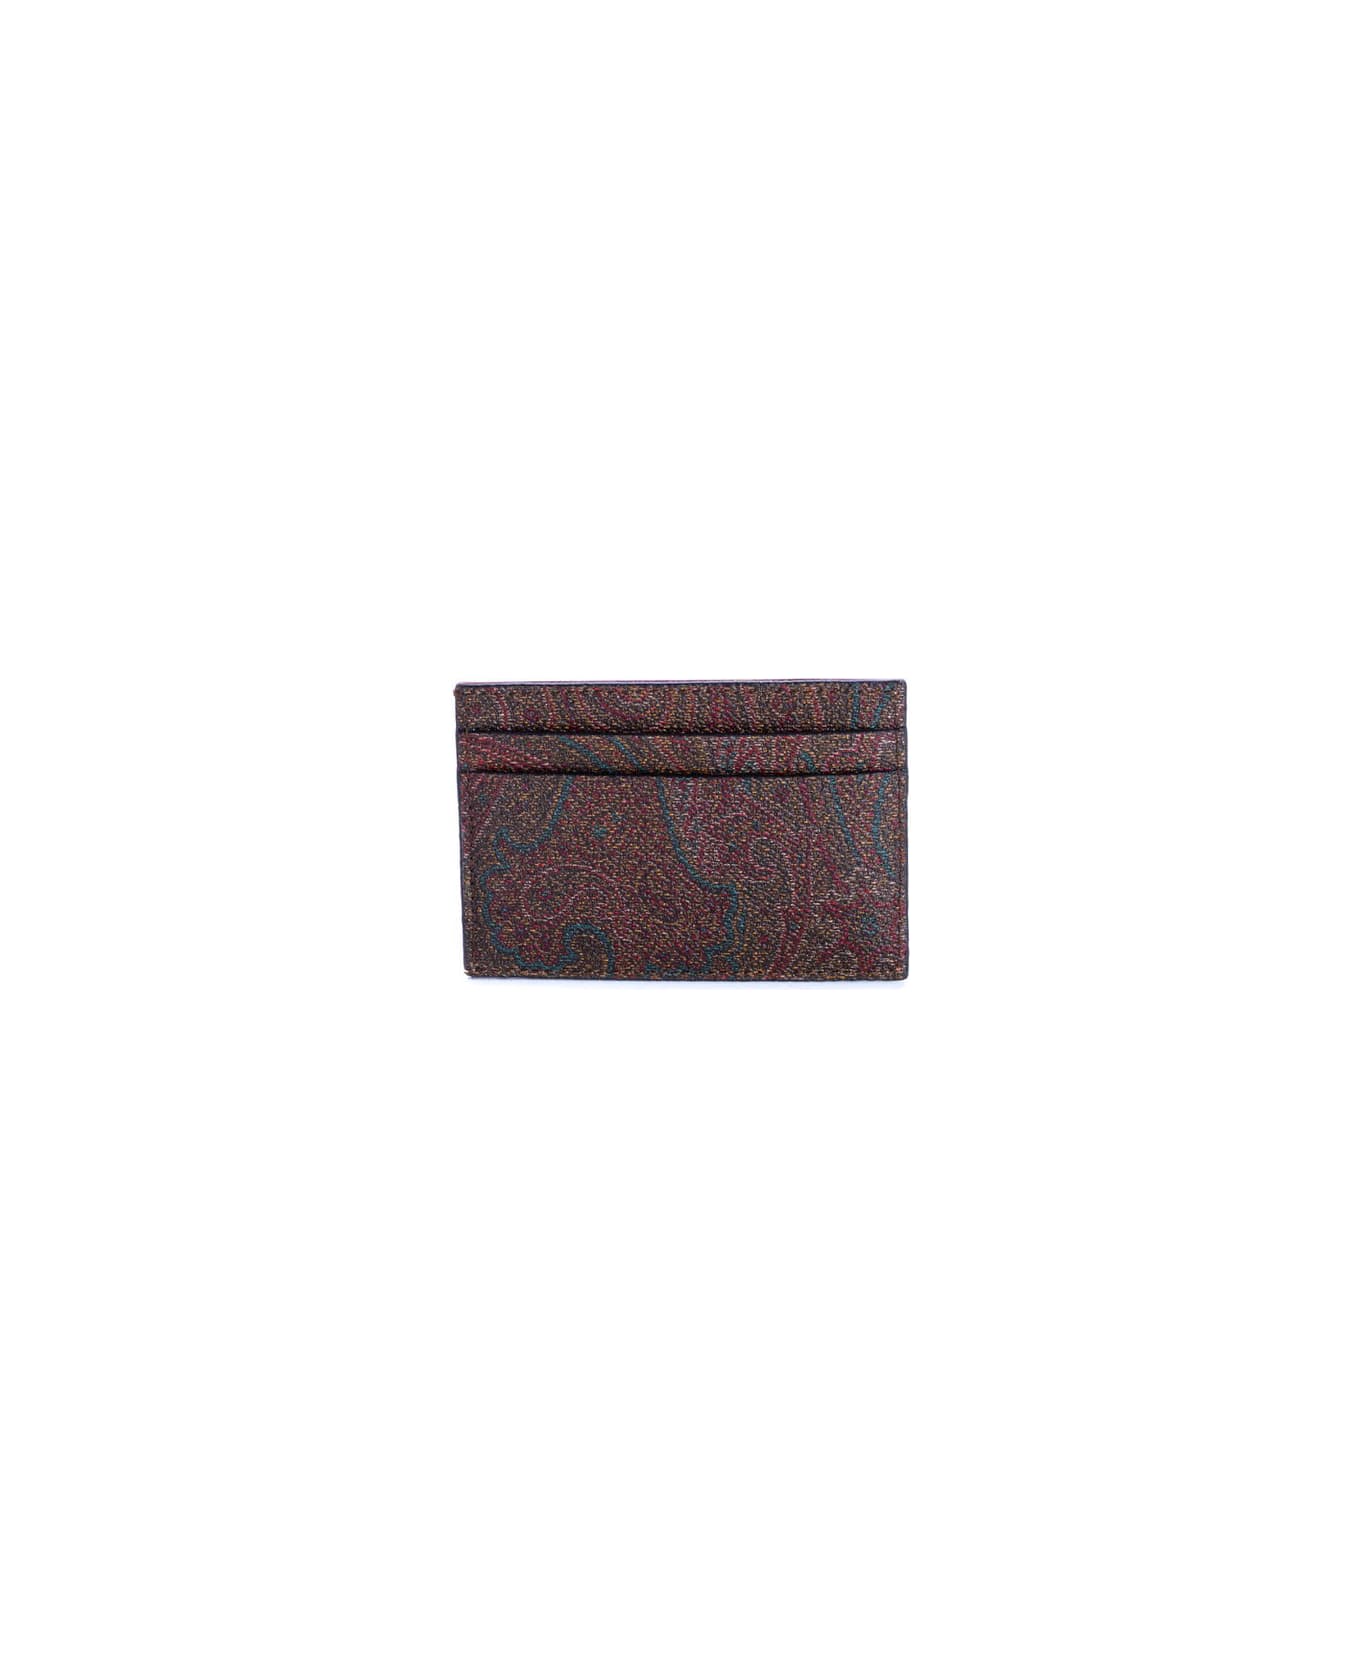 Etro "paisley" Card Holder - BROWN